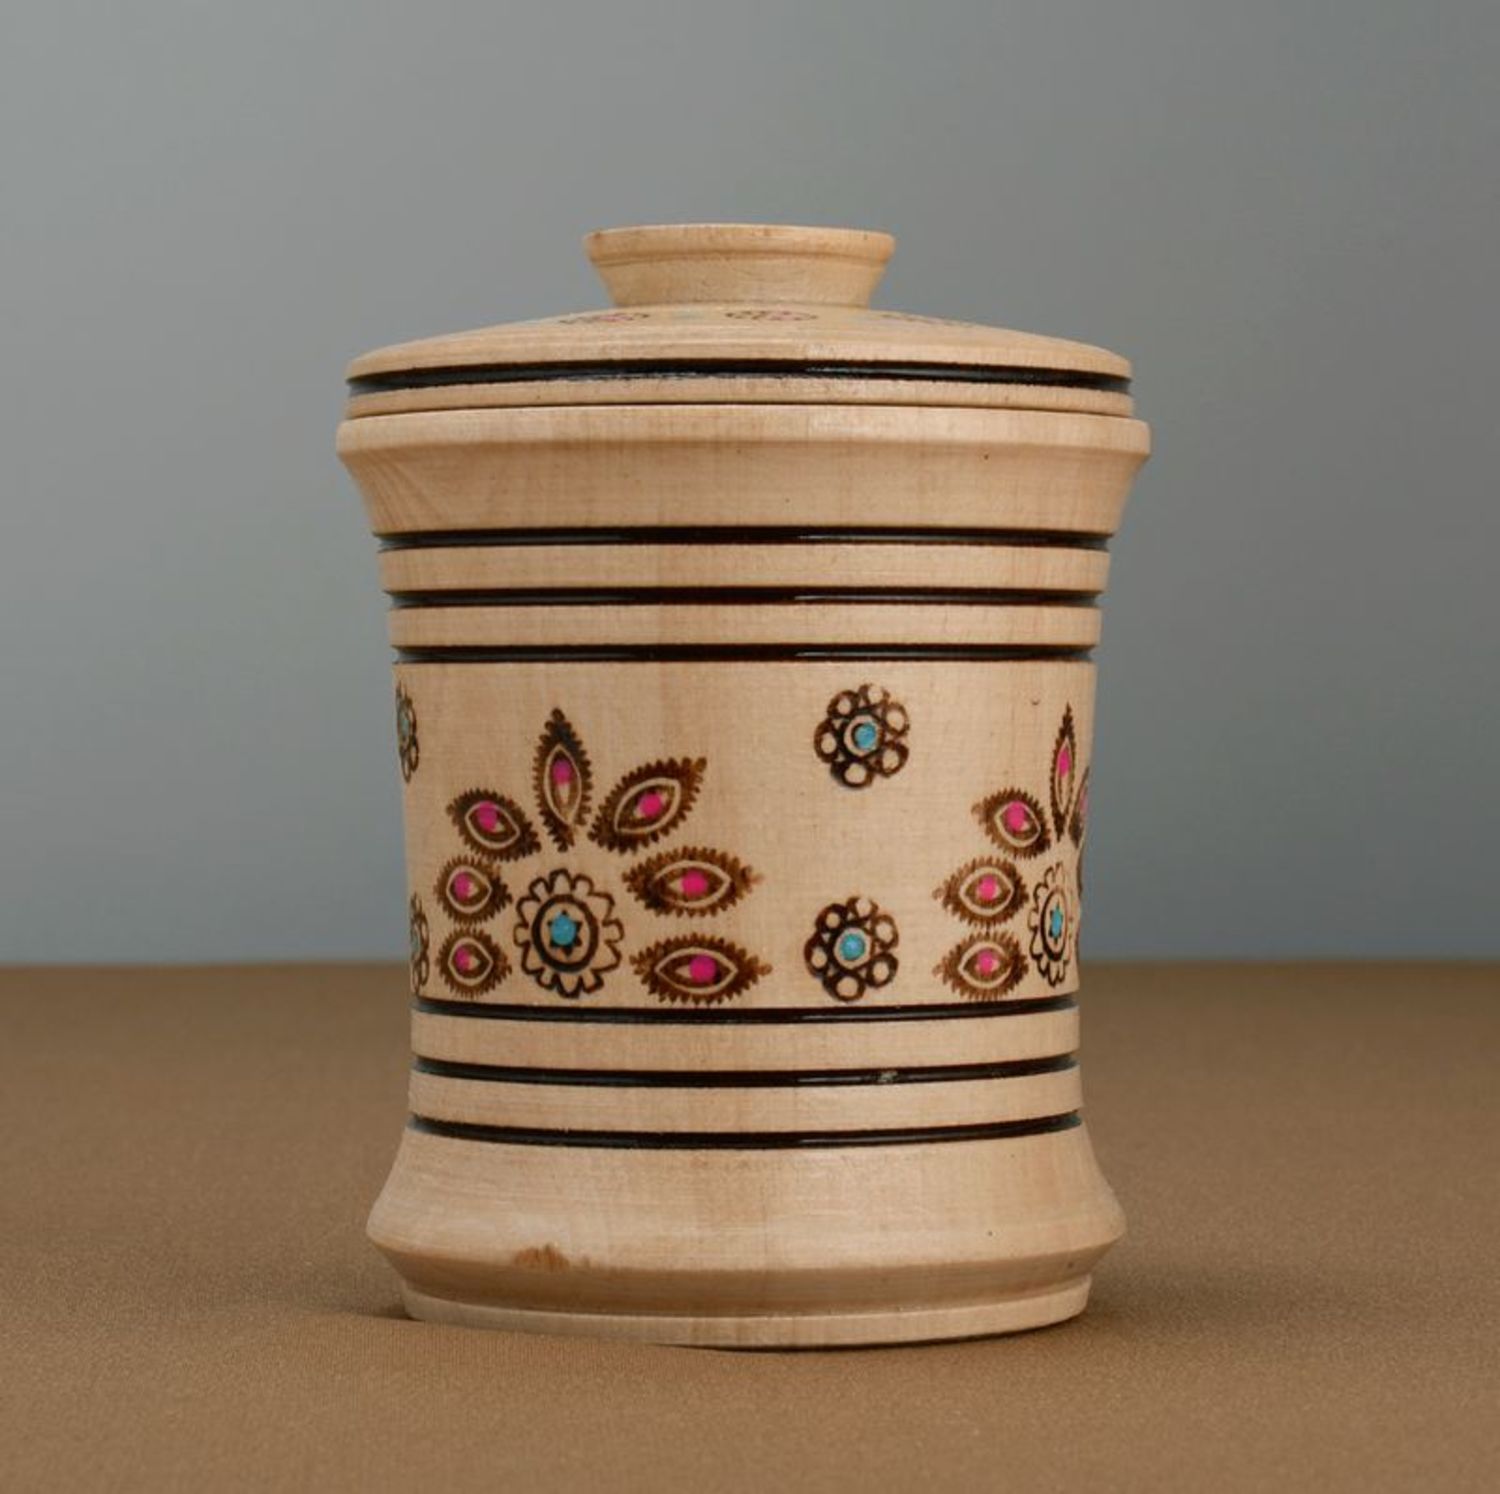 Wooden handmade jar container 10 oz with pattern and lid 0,5 lb photo 3